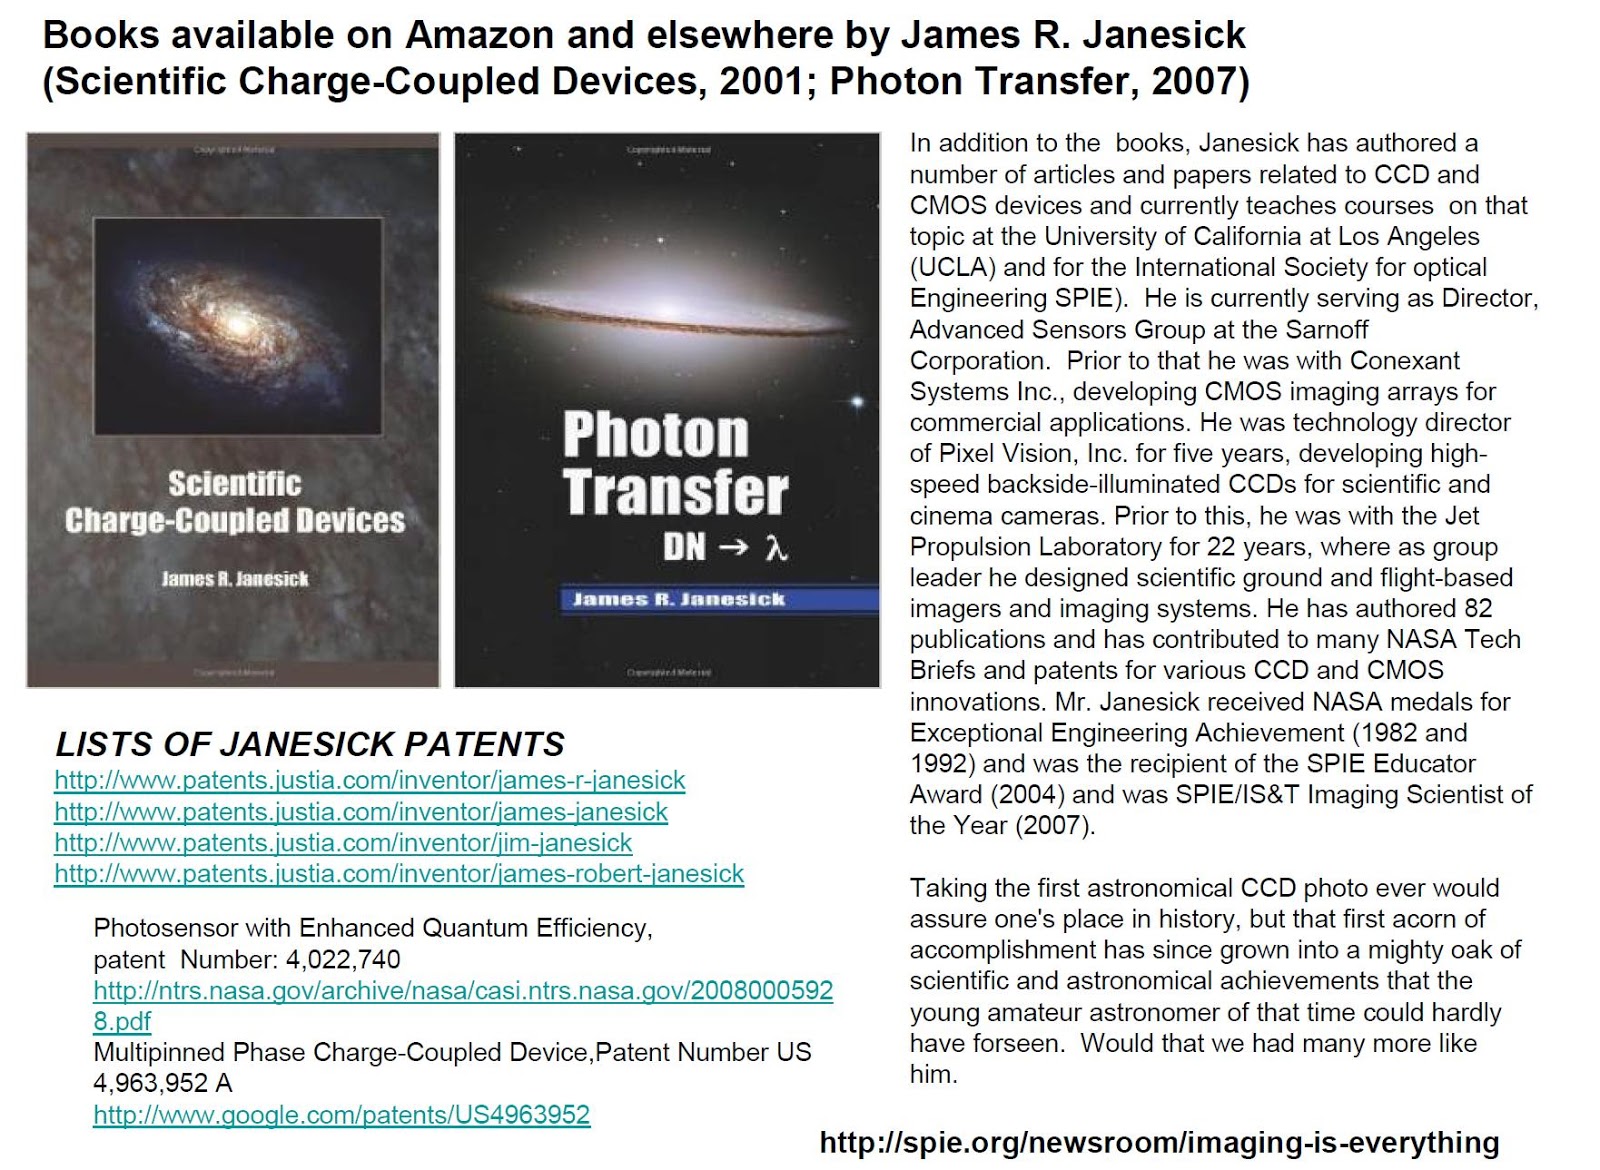 Books and patents by James janesick